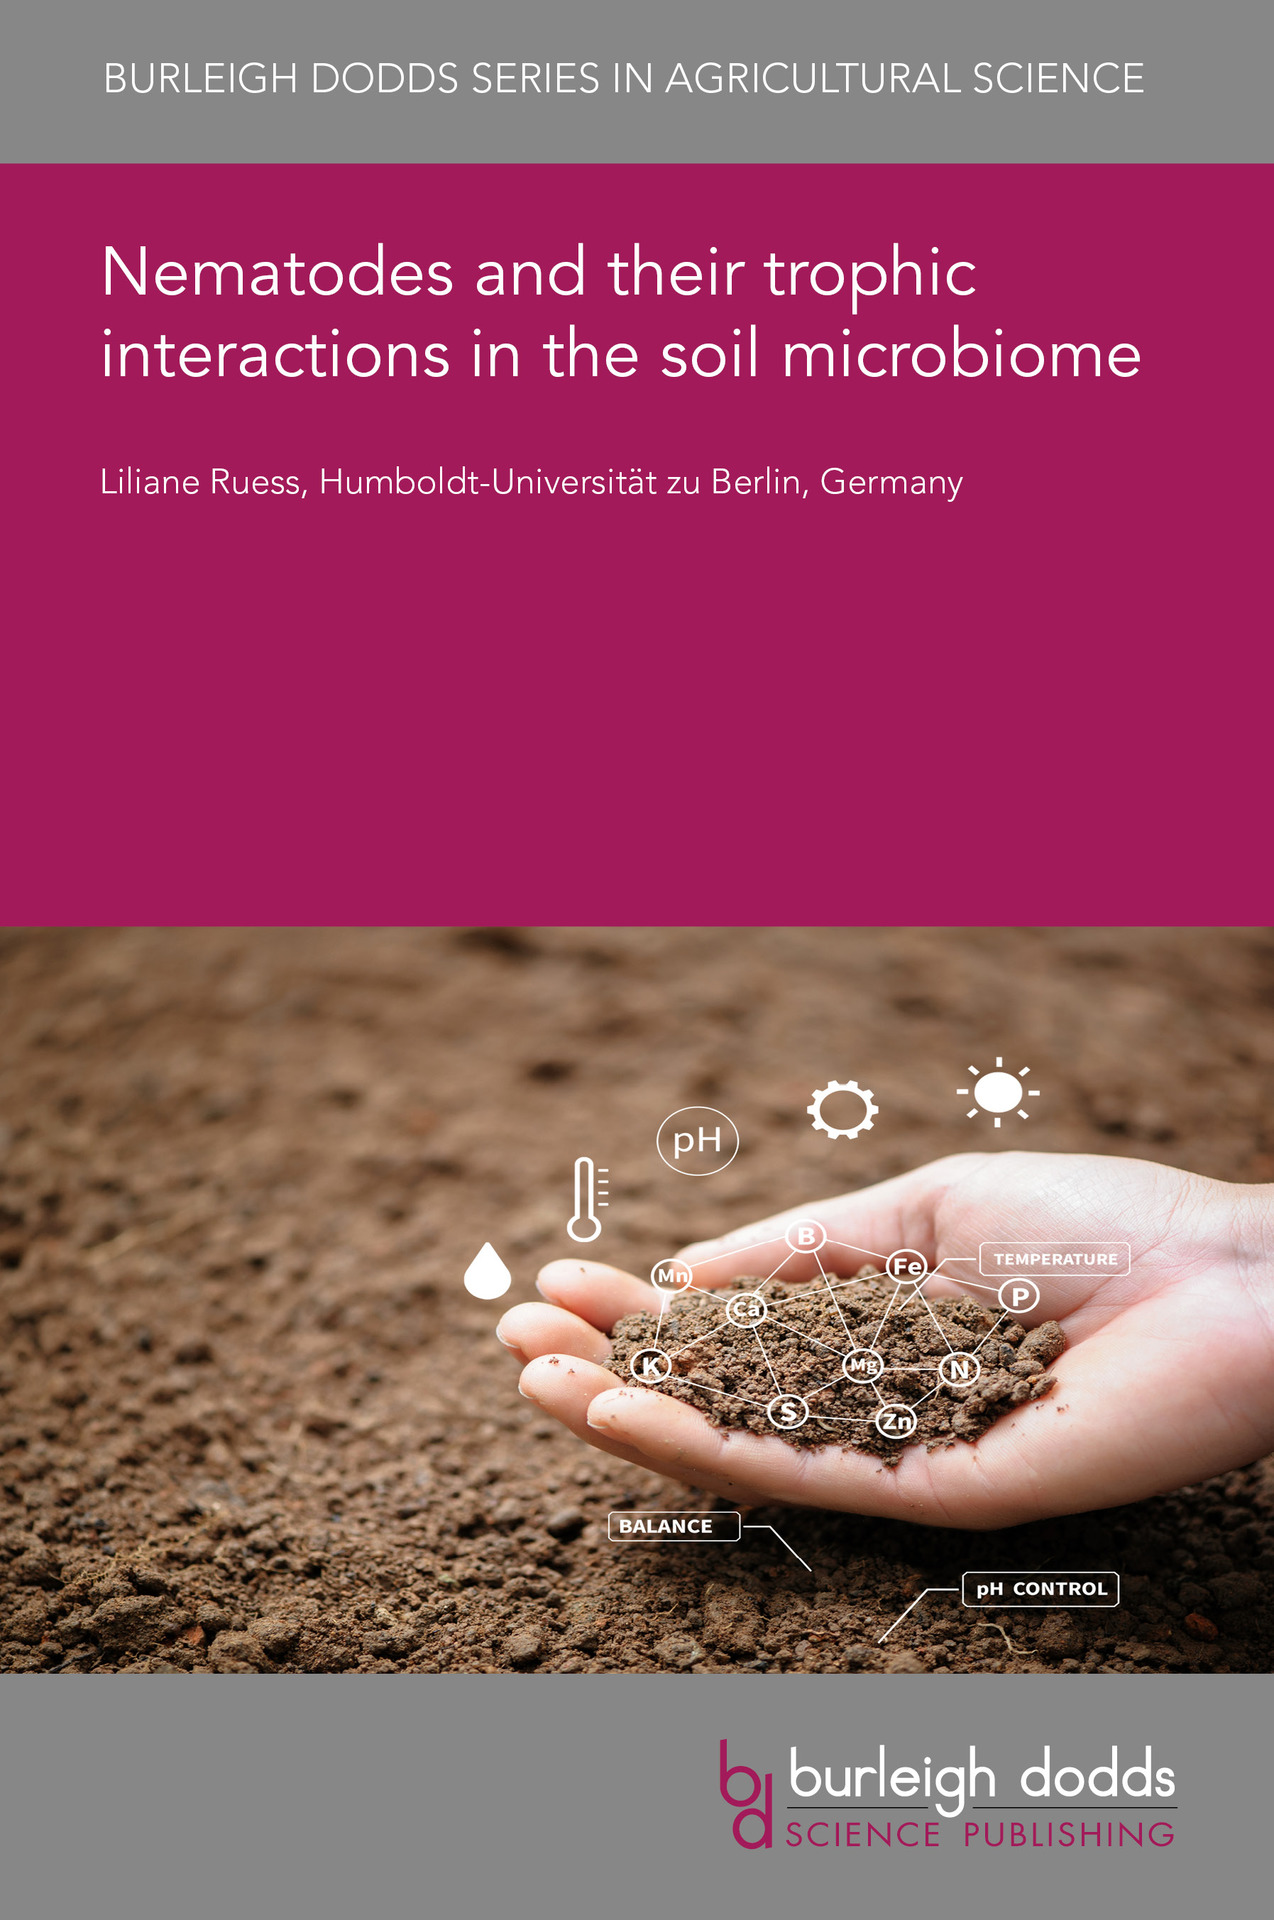 Nematodes and their trophic interactions in the soil microbiome